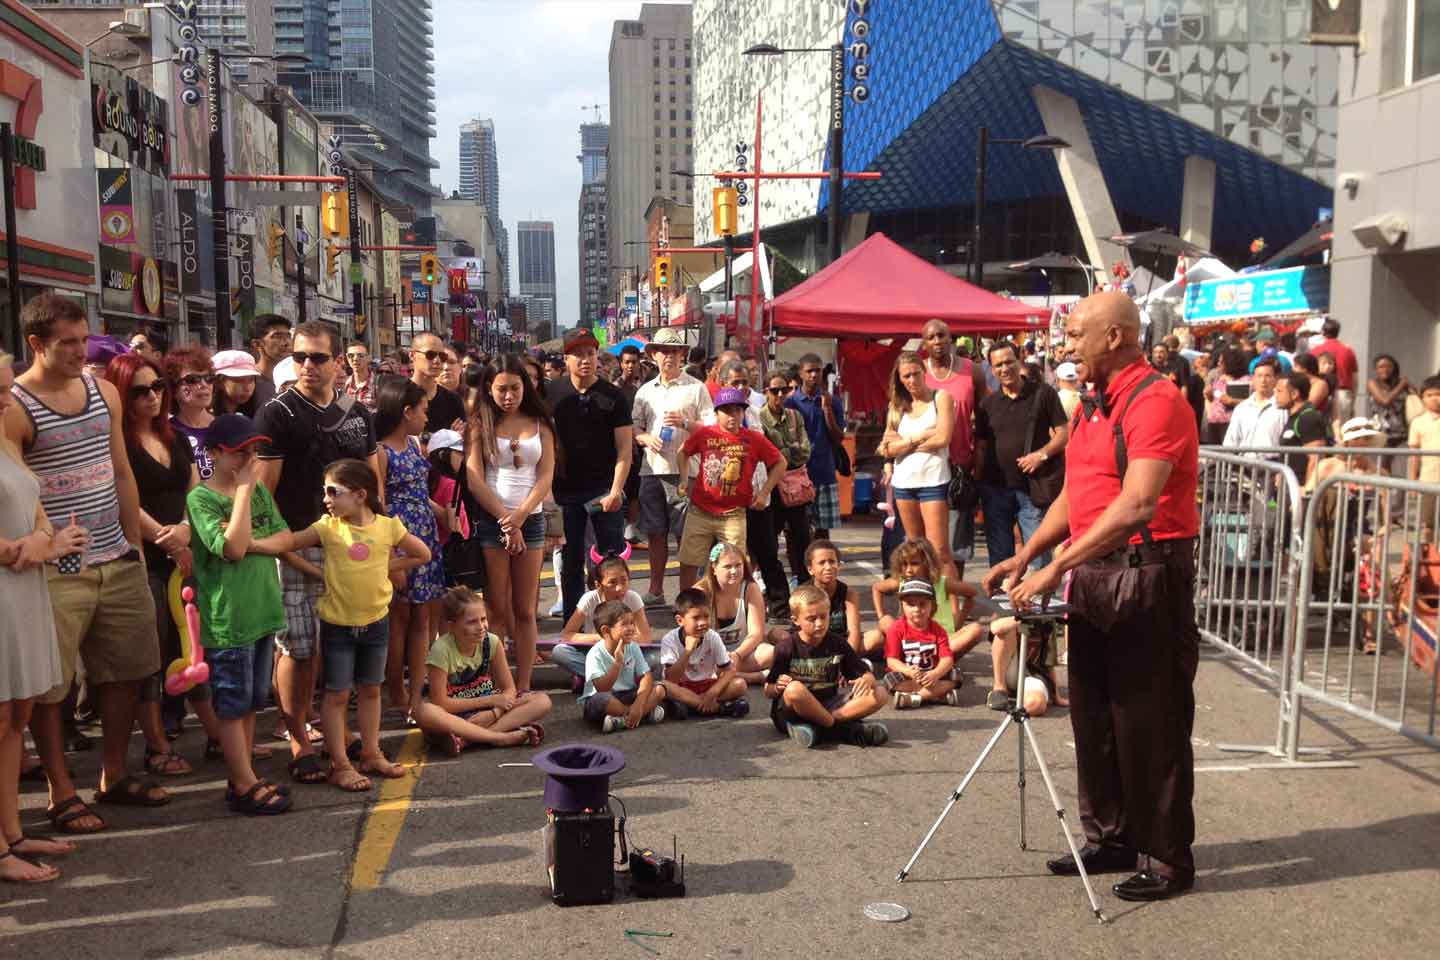 Image of Andrew Eland performing at Buskerfest in Toronto, Canada